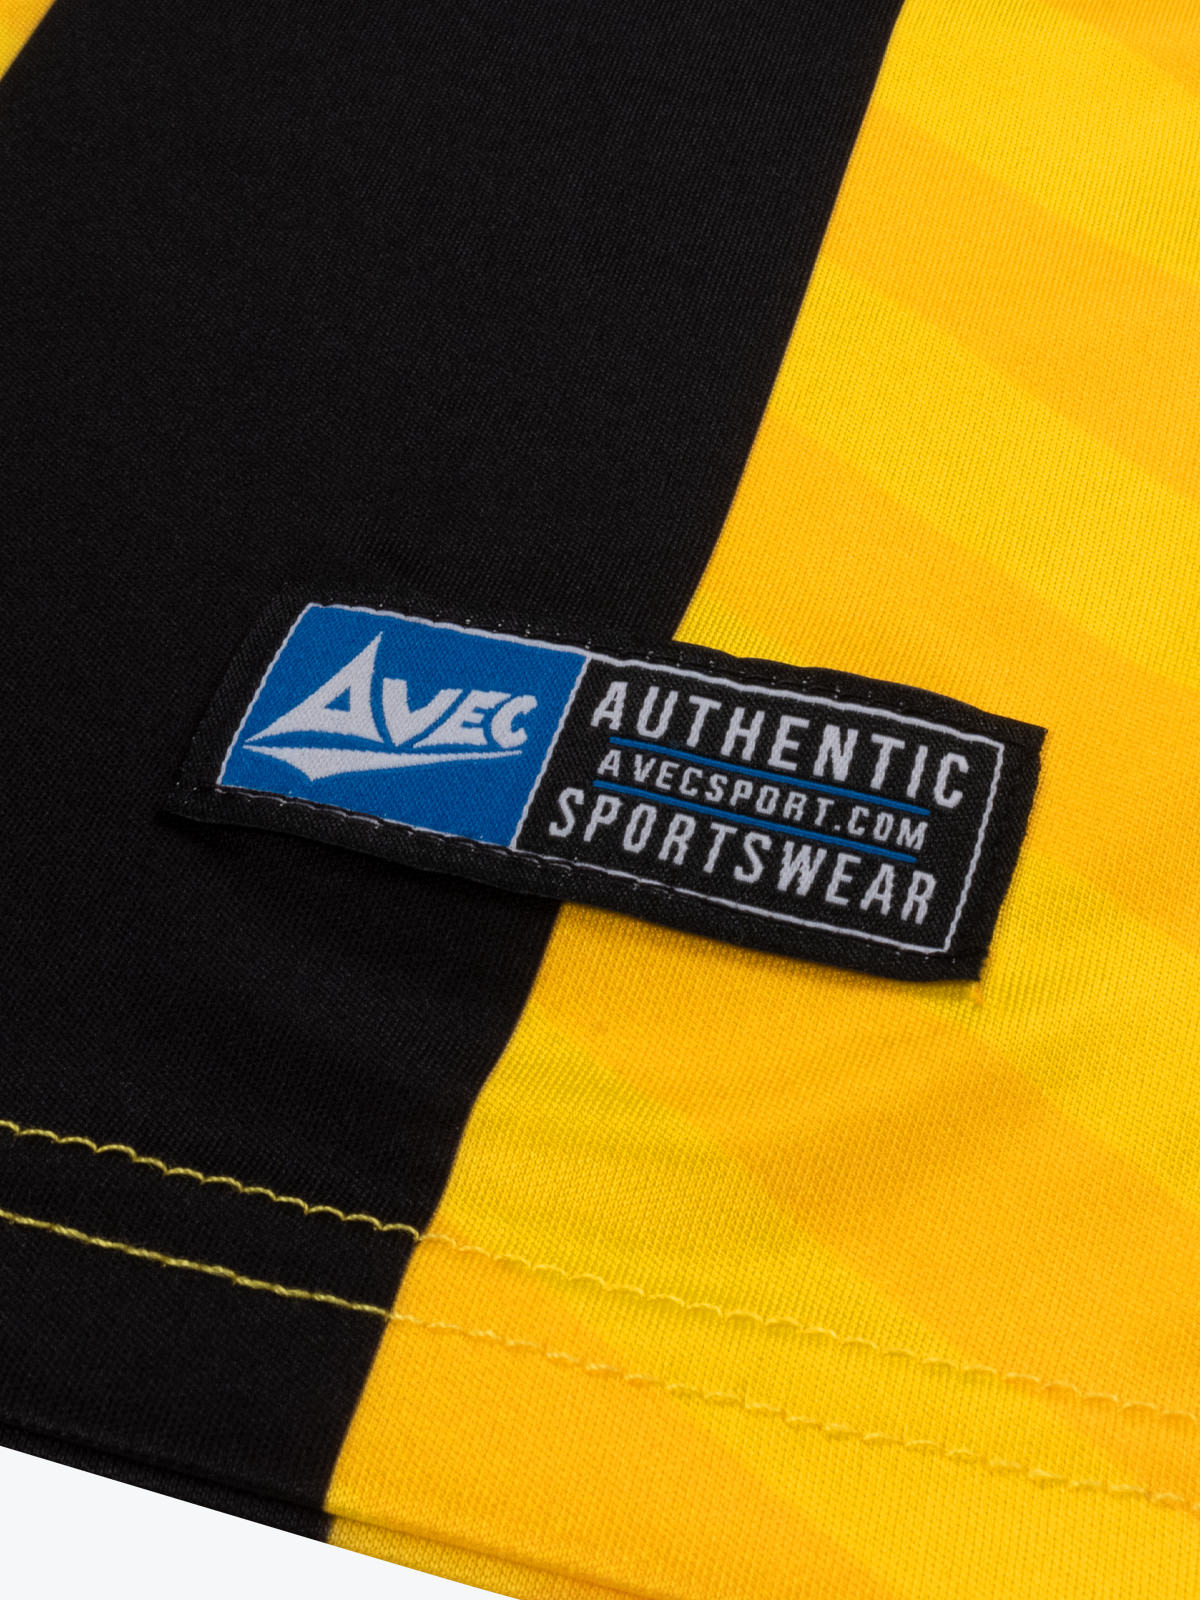 picture of team id pro stripe jersey - yellow/black